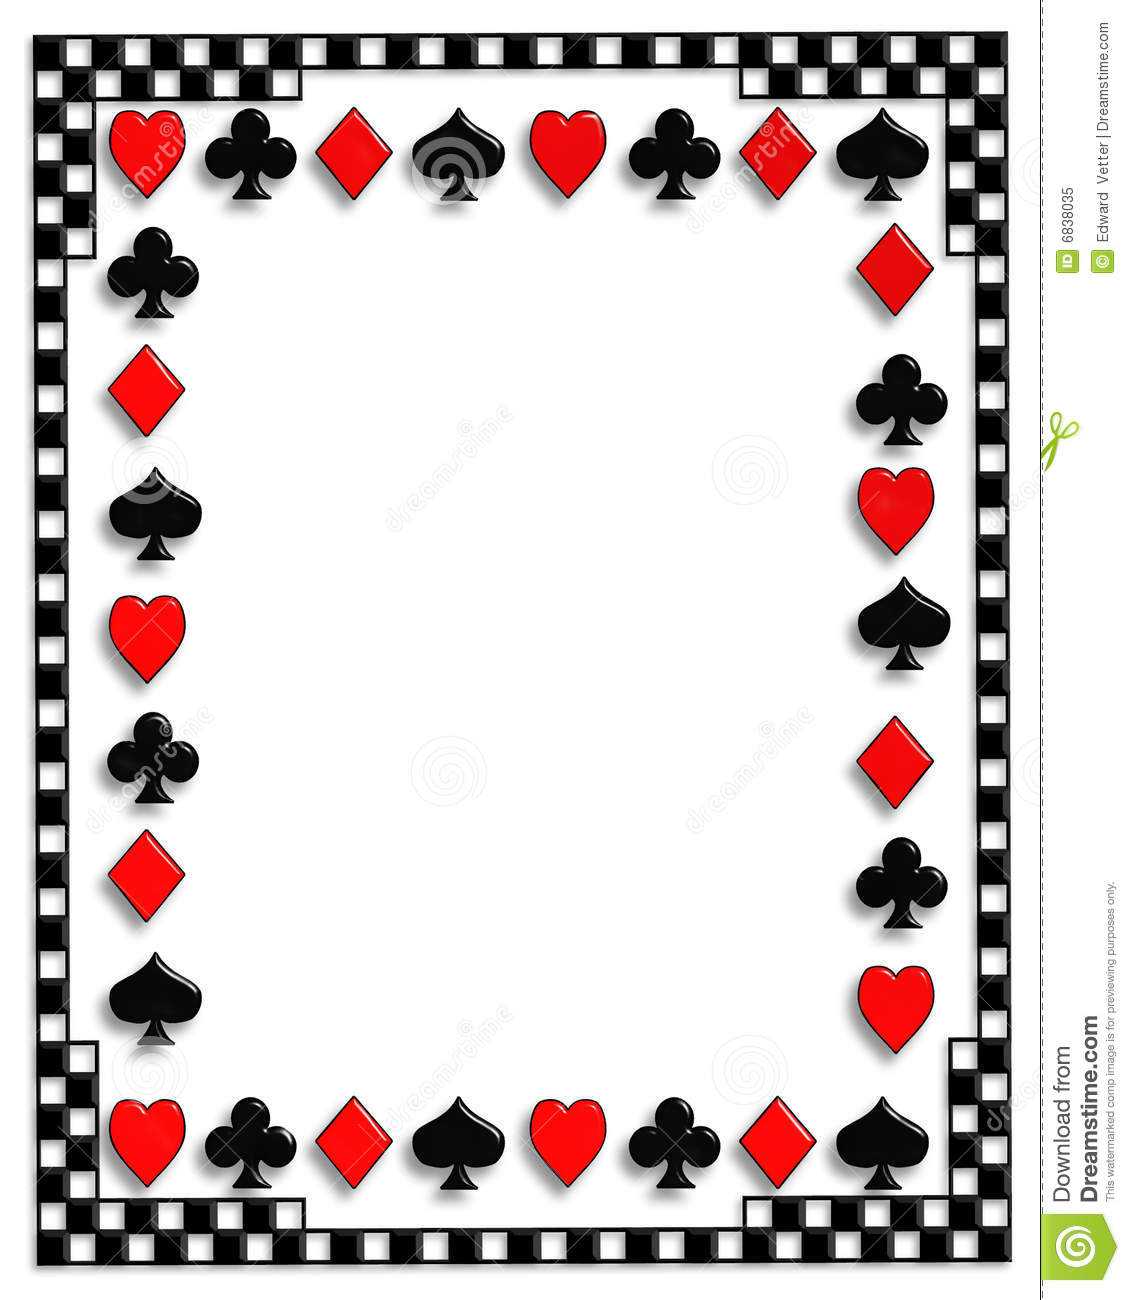 Playing Cards Border Poker Suits Stock Illustration Within Playing Card Design Template